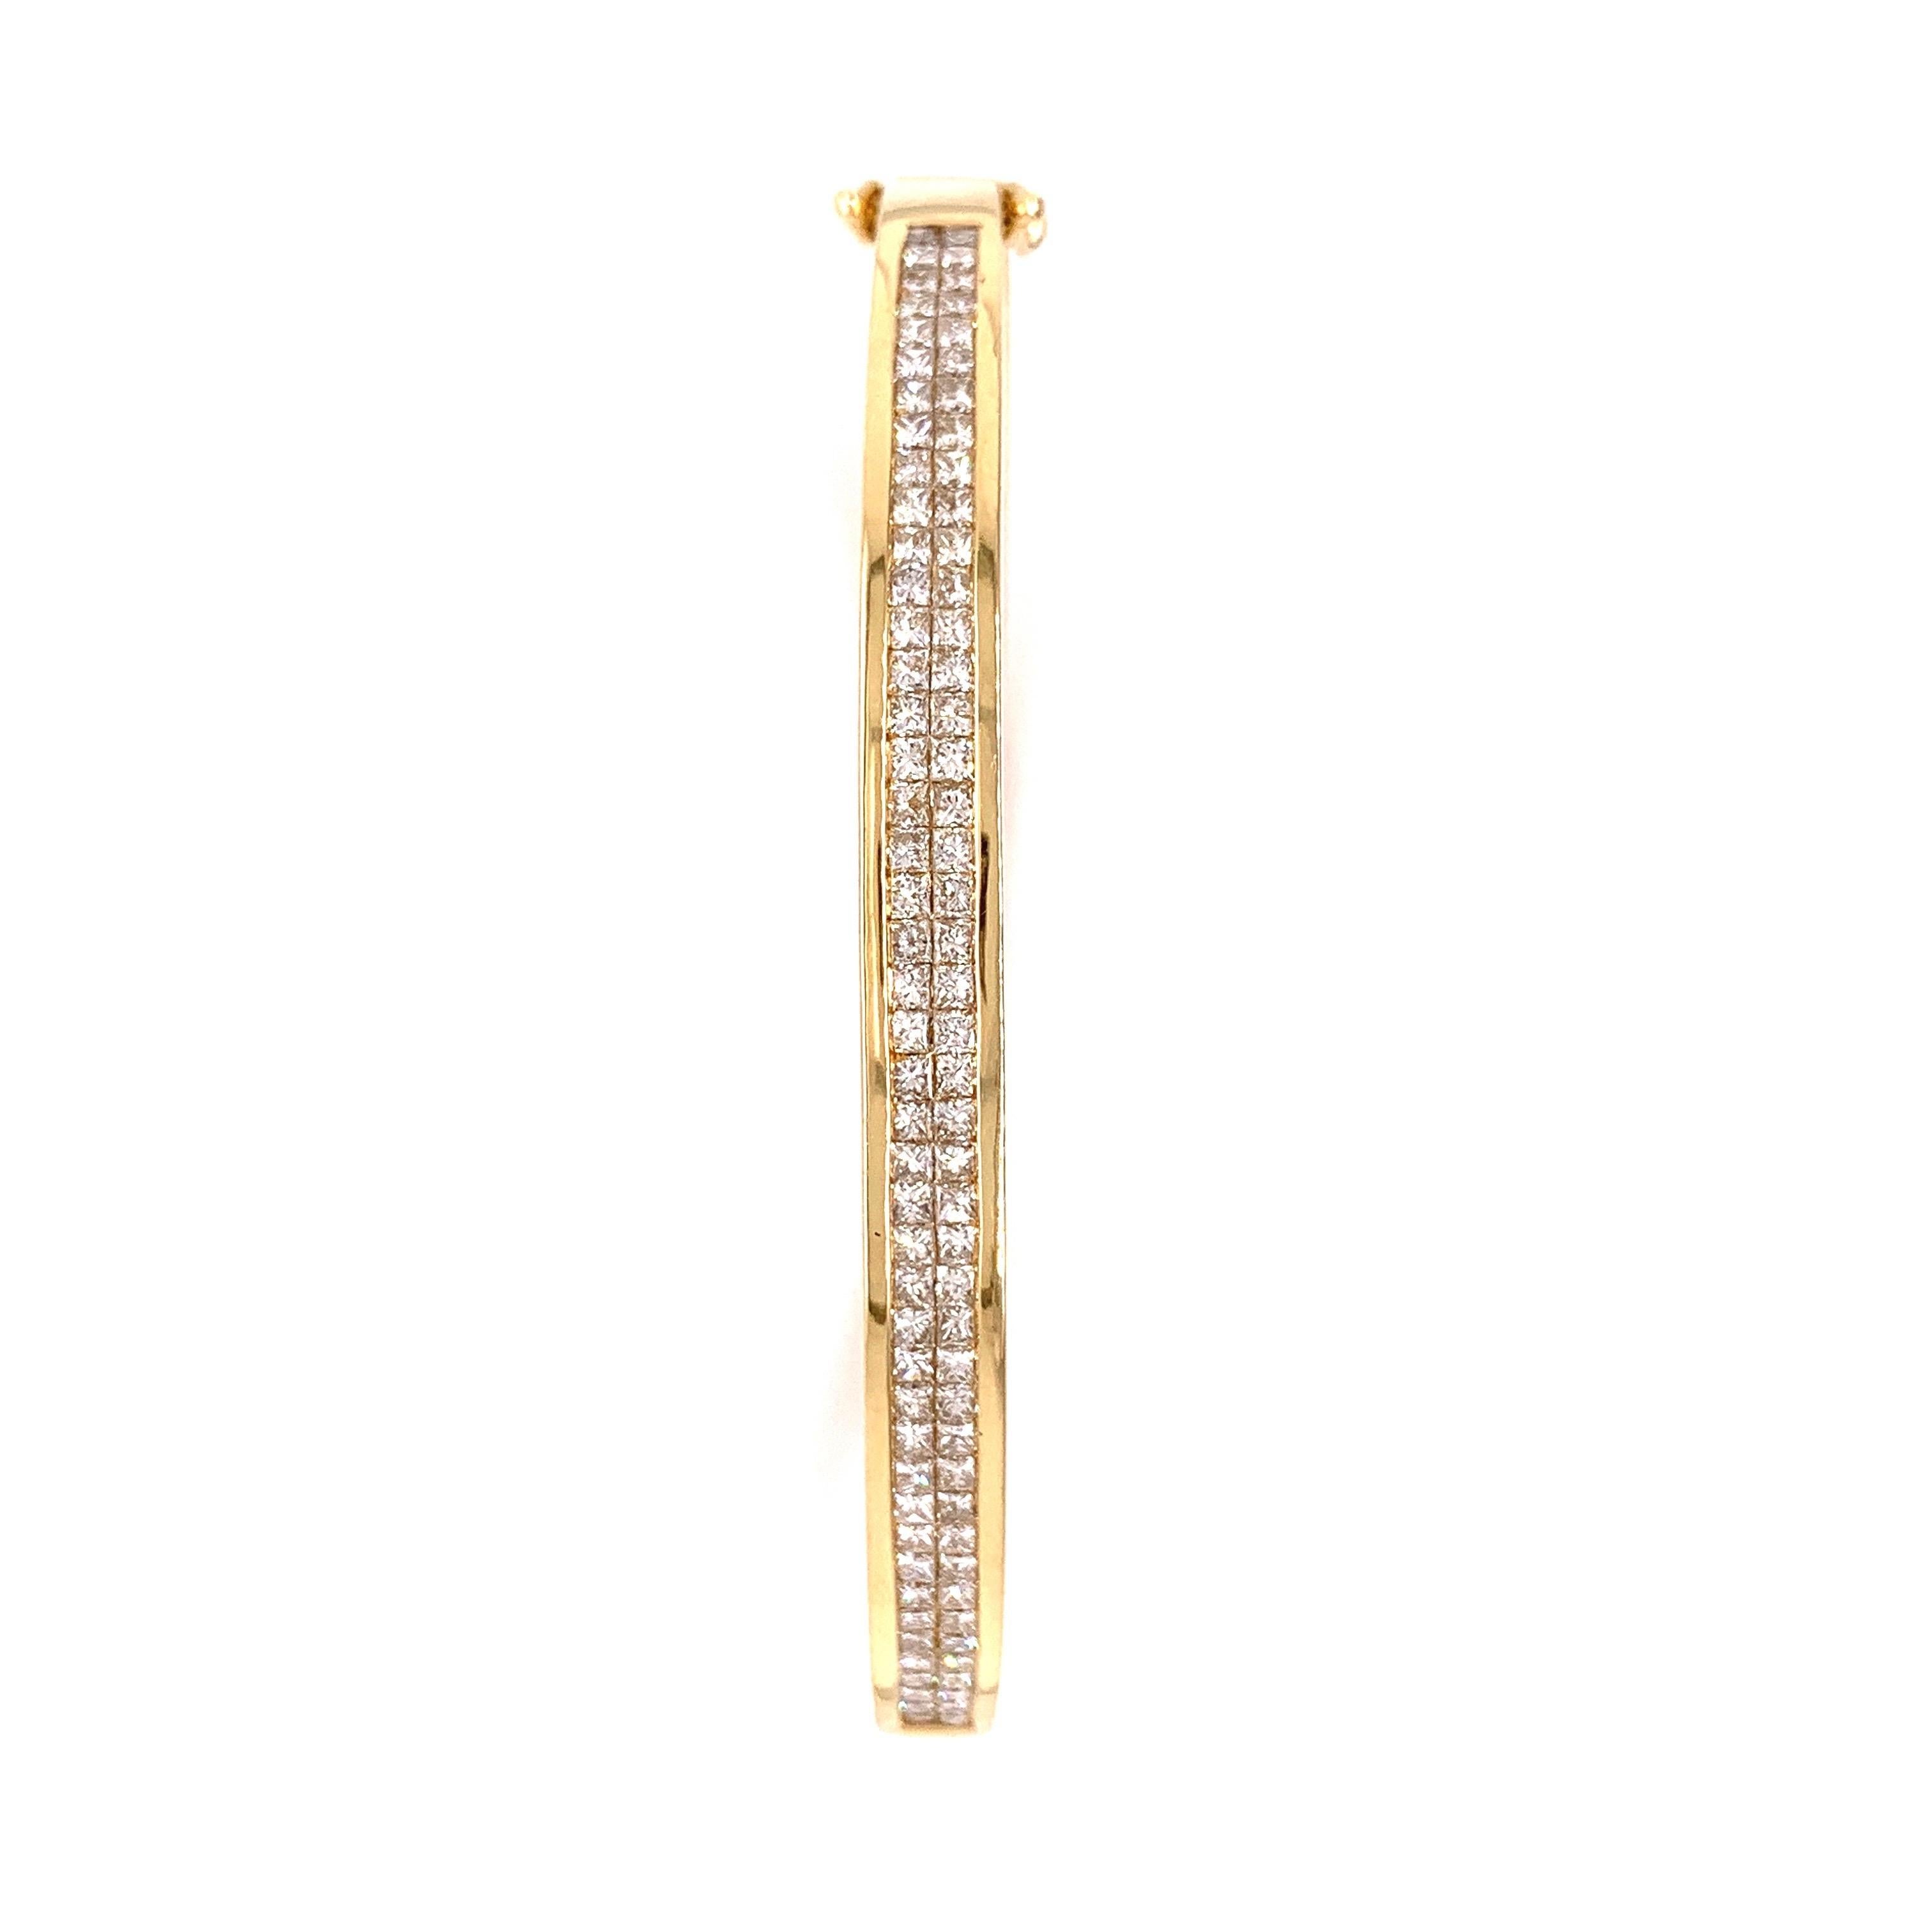 Elegant diamond bangle. Sparkling two rows of princess cut diamonds in hand-crafted 14 karats high polished yellow gold with tapered box clasp and safety catch. 

Diamond: 1.75 carats, princess cut
colour: I-J
Clarity: SI1-I1
Dimensions: 5.1/5cm x